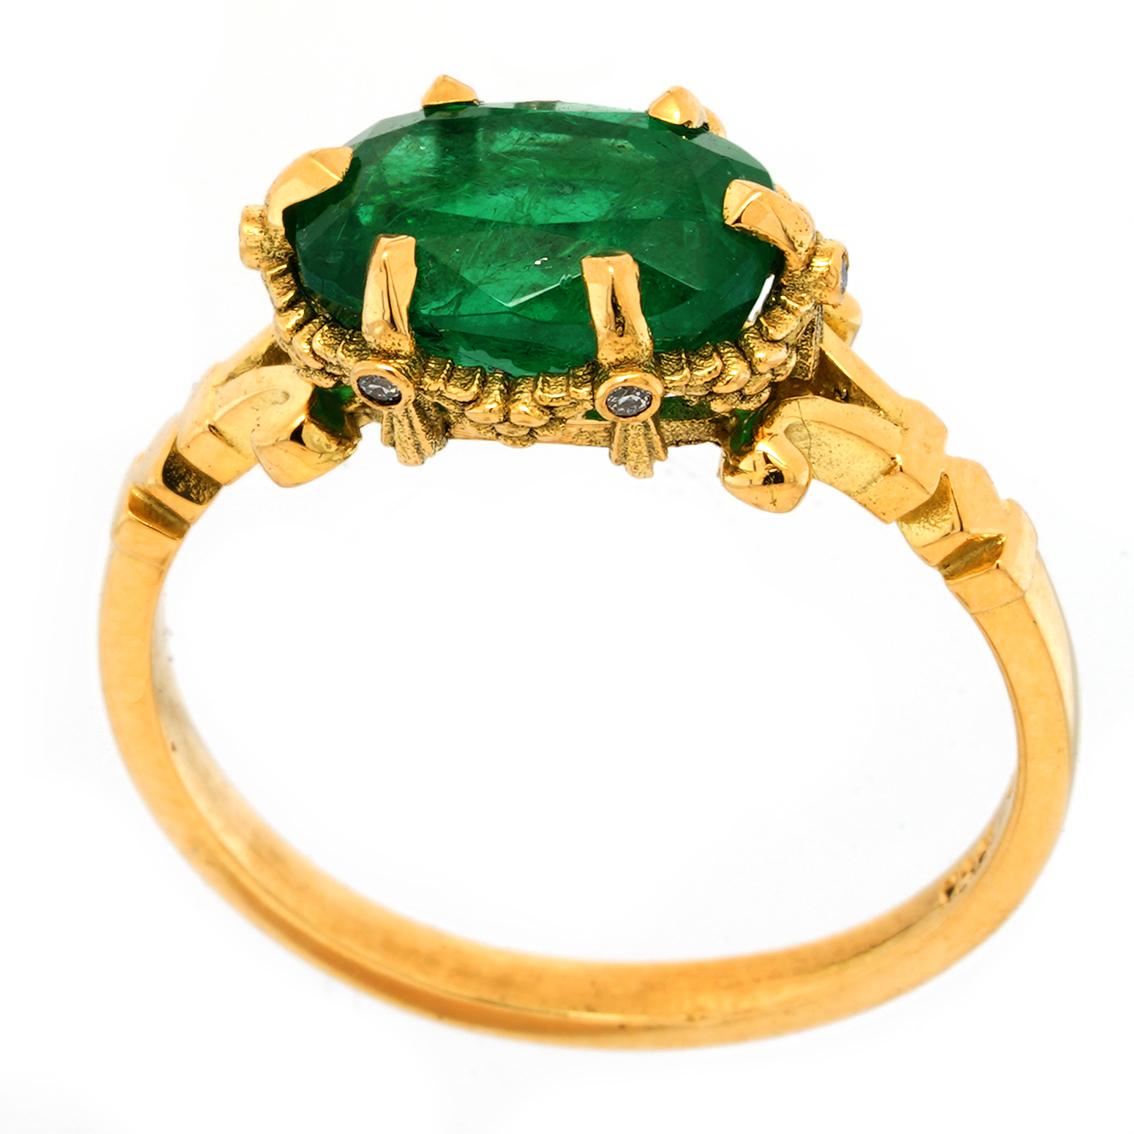 The emerald tablet was an hermetic text said to have been inscribed on a tablet of emerald and was reputed to contain the alchemical secrets behind the creation of the world. 

Exquisitely handcrafted in 18kt yellow gold this otherworldly ring